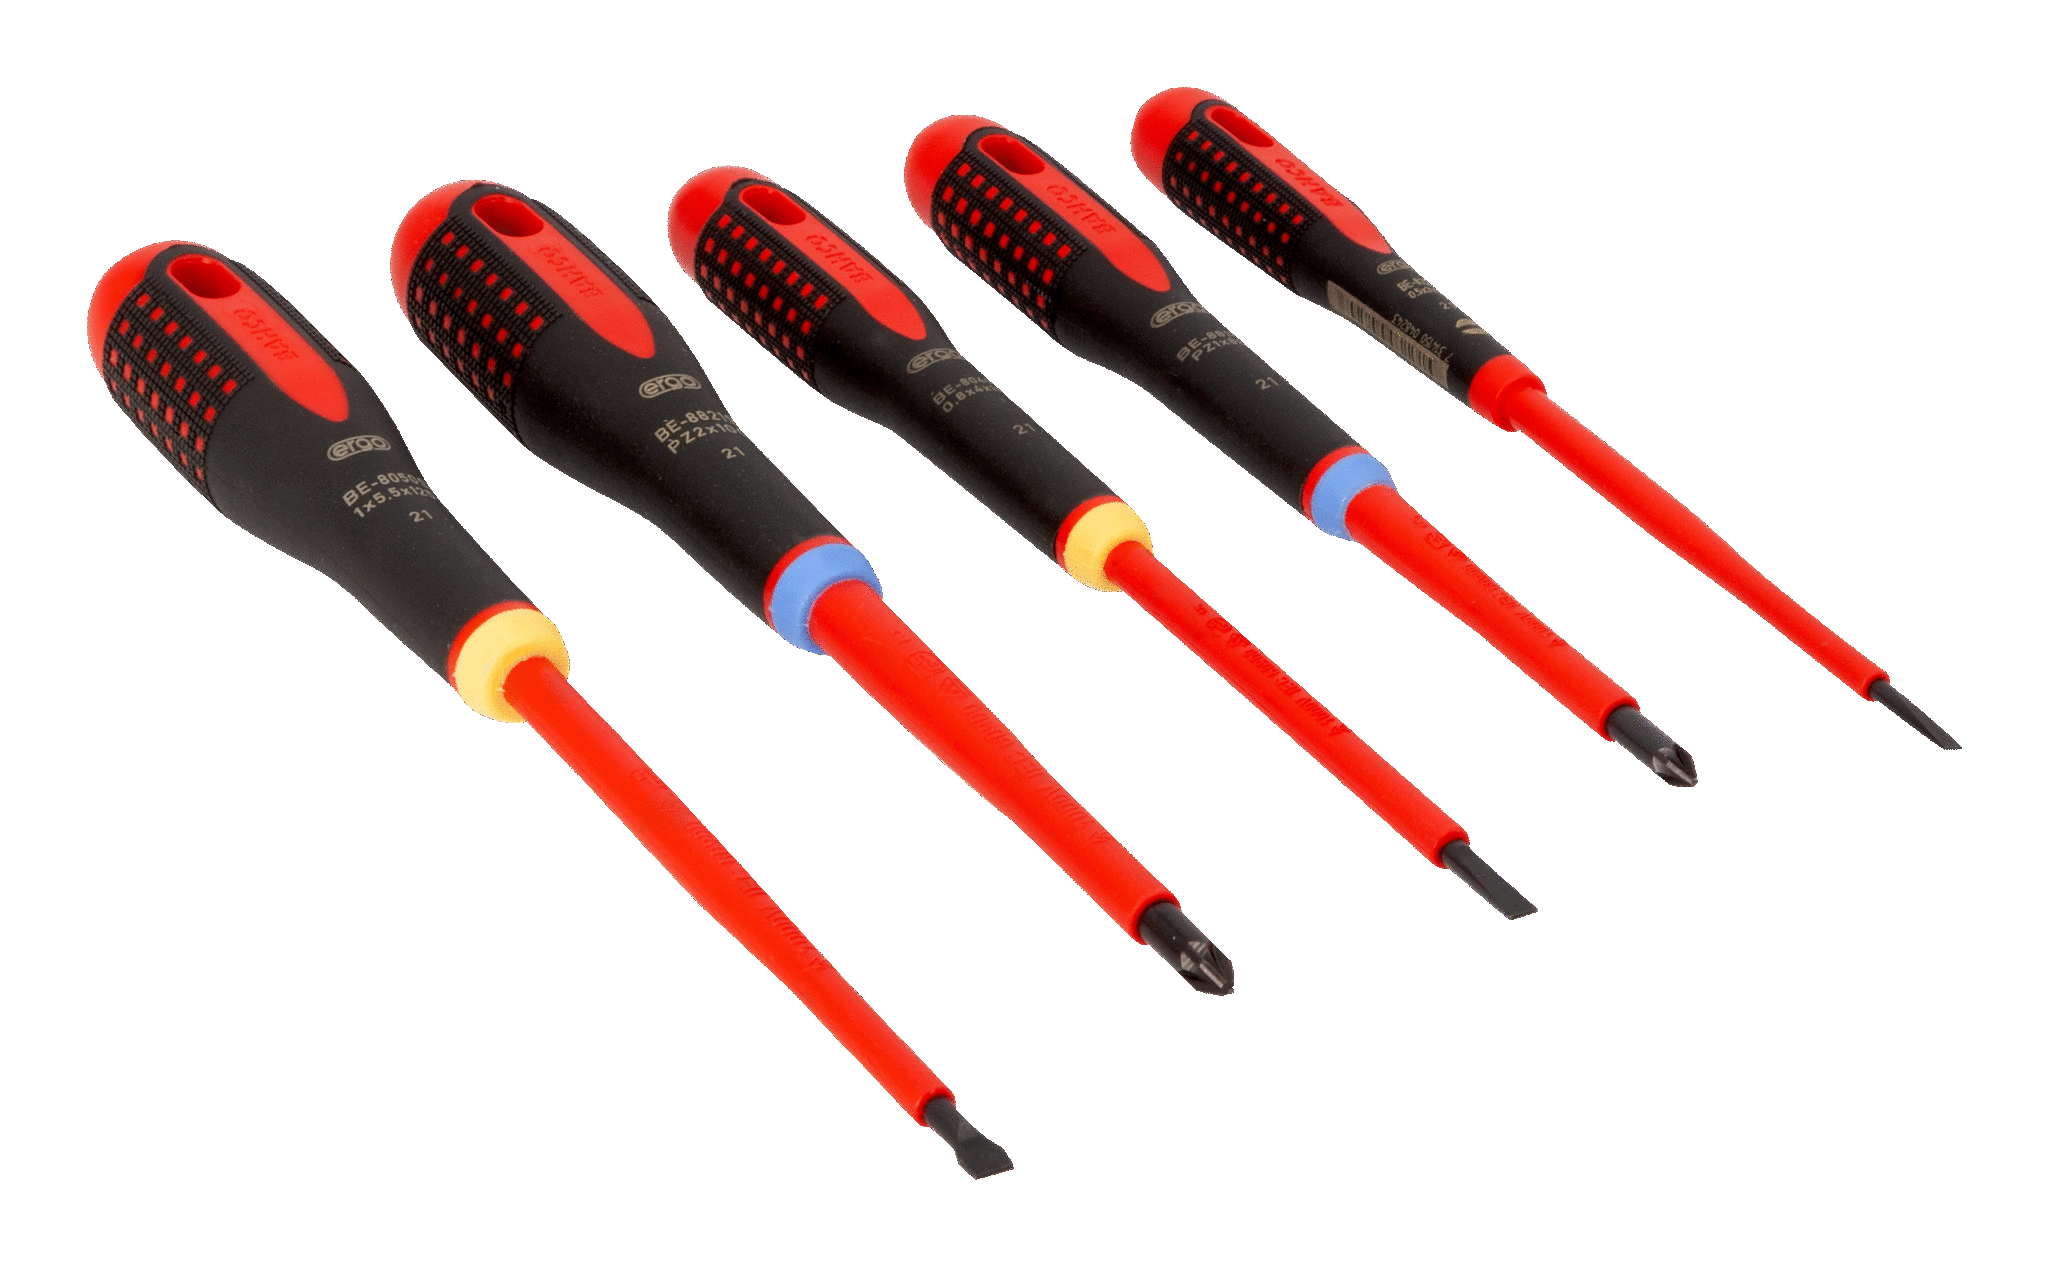 ERGO™ VDE Insulated Slotted and Pozidriv Screwdriver Set with 3-Component Handle 5 Pcs - BE-9882S by Bahco